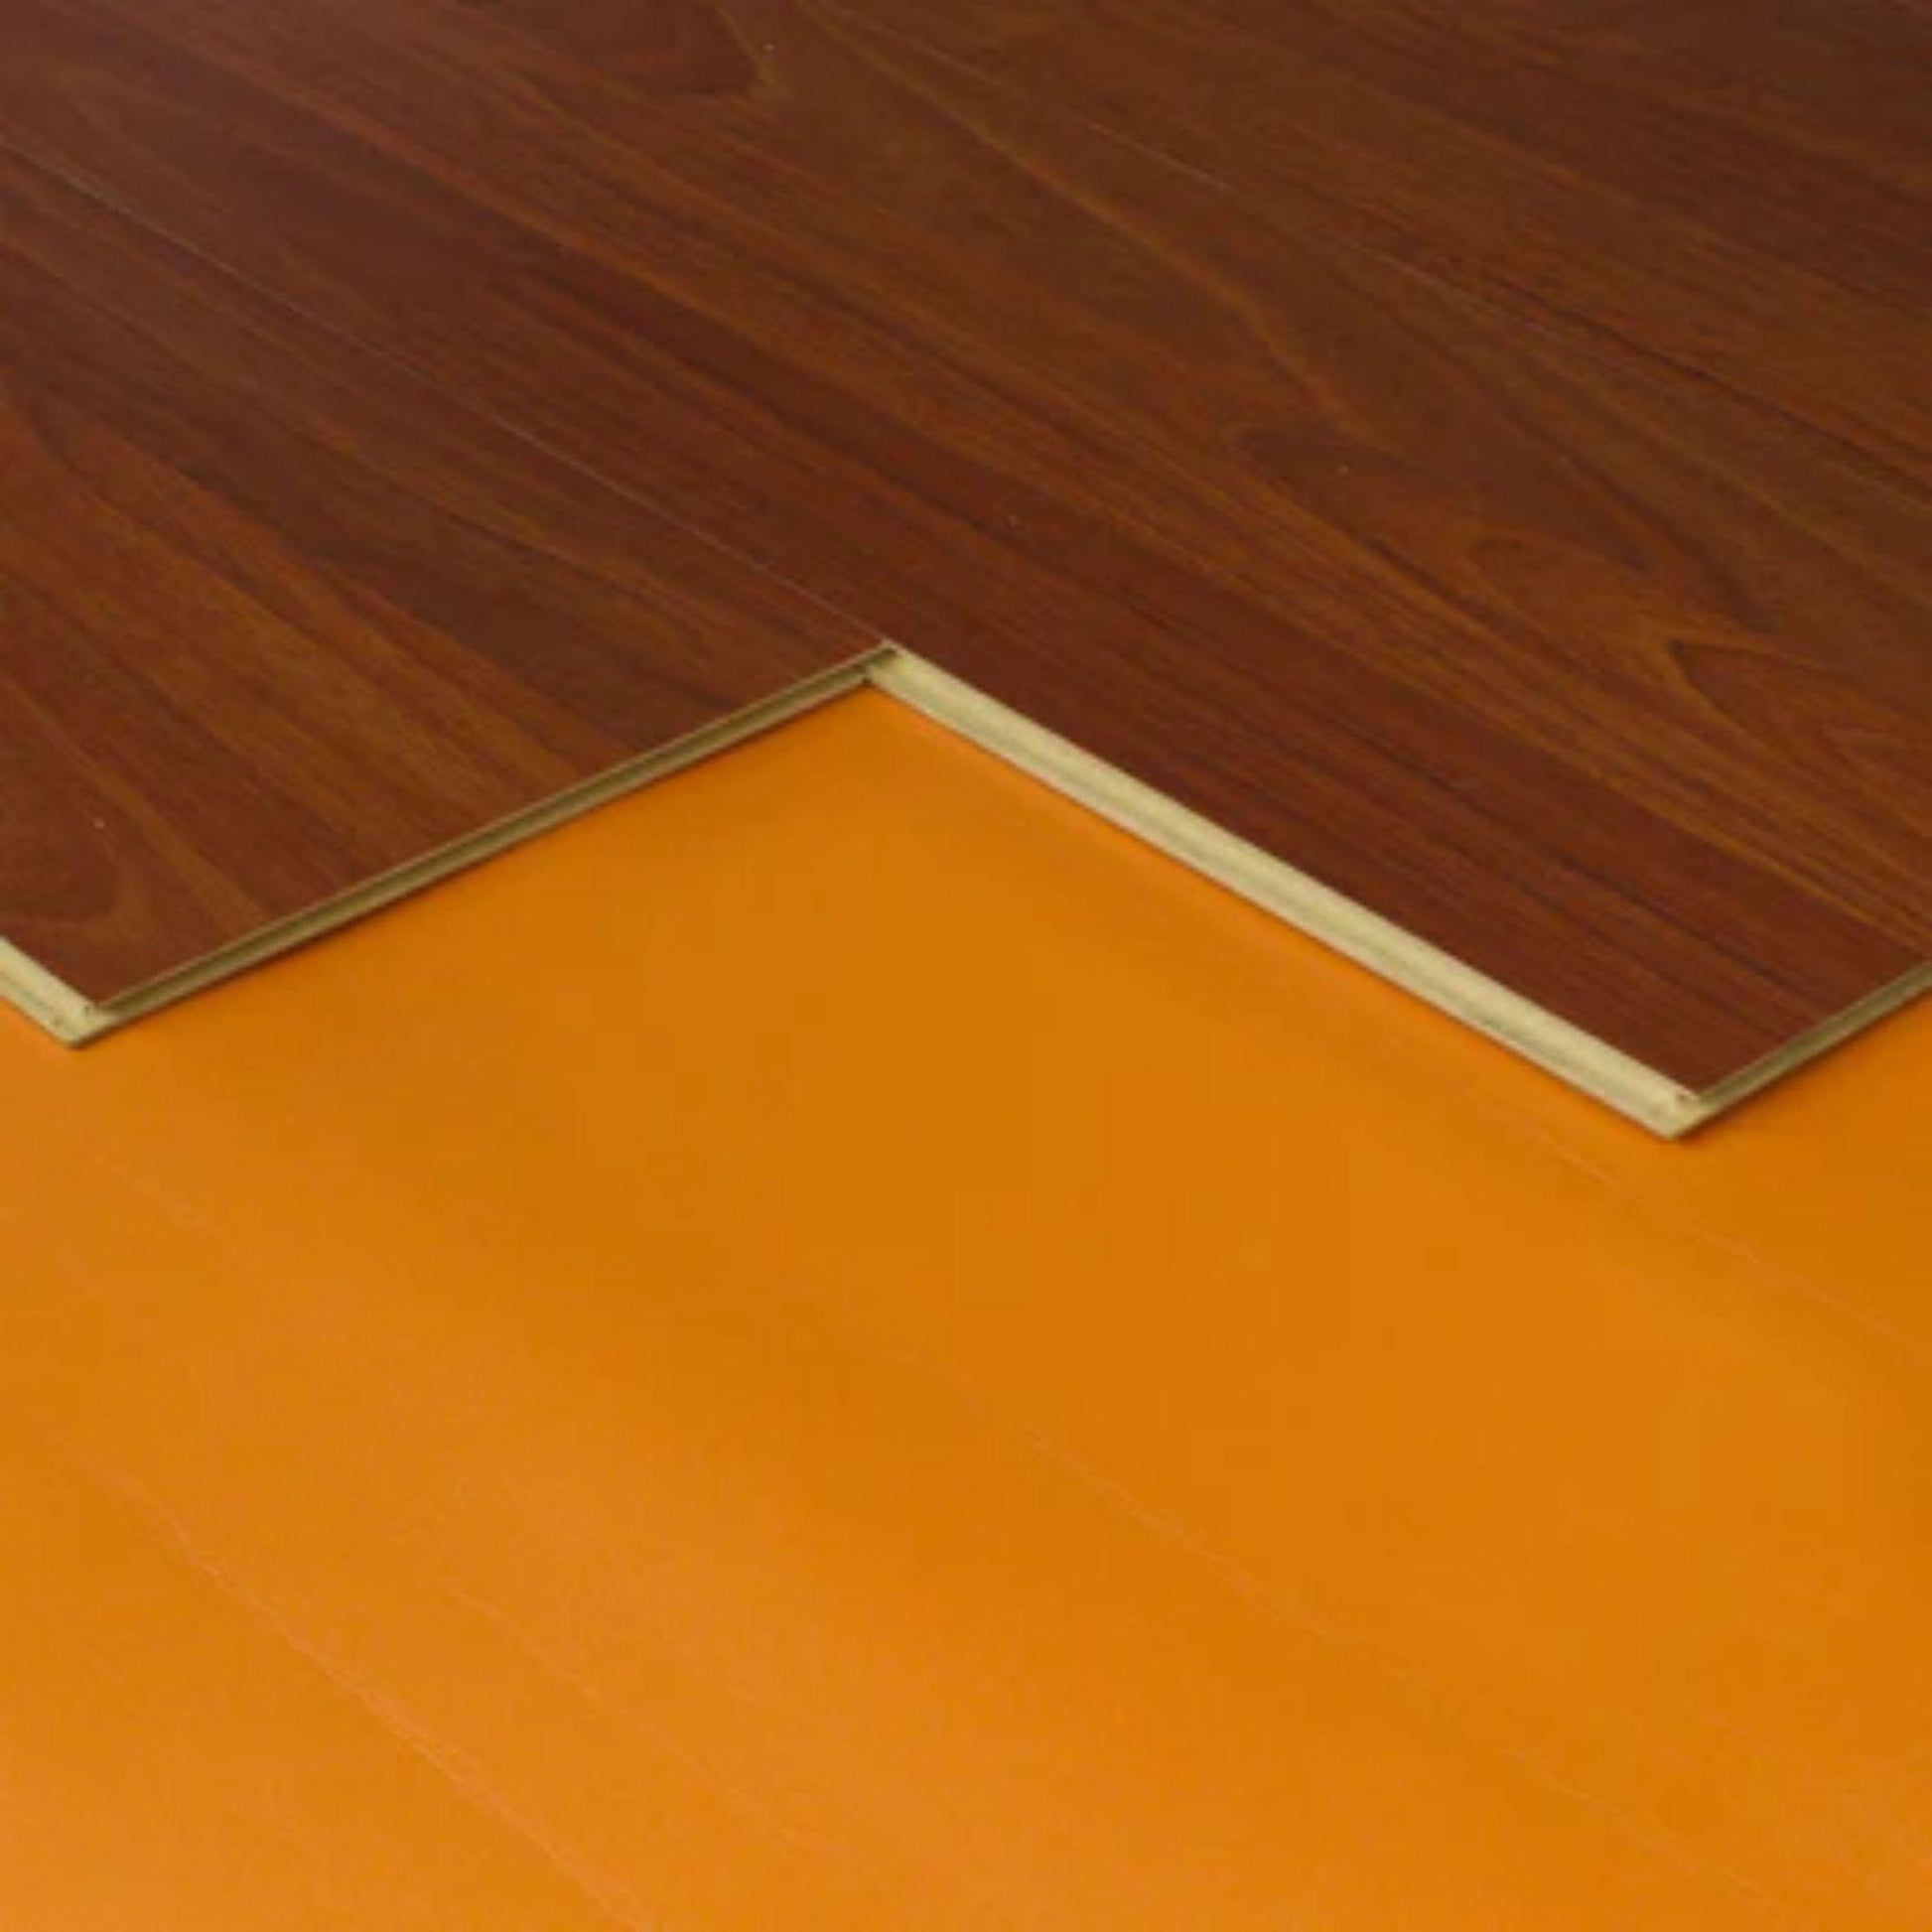 LessCare 2mm Floor Underlayment (100 Sq Ft) Advanced Acoustical Protection and Moisture Barrier